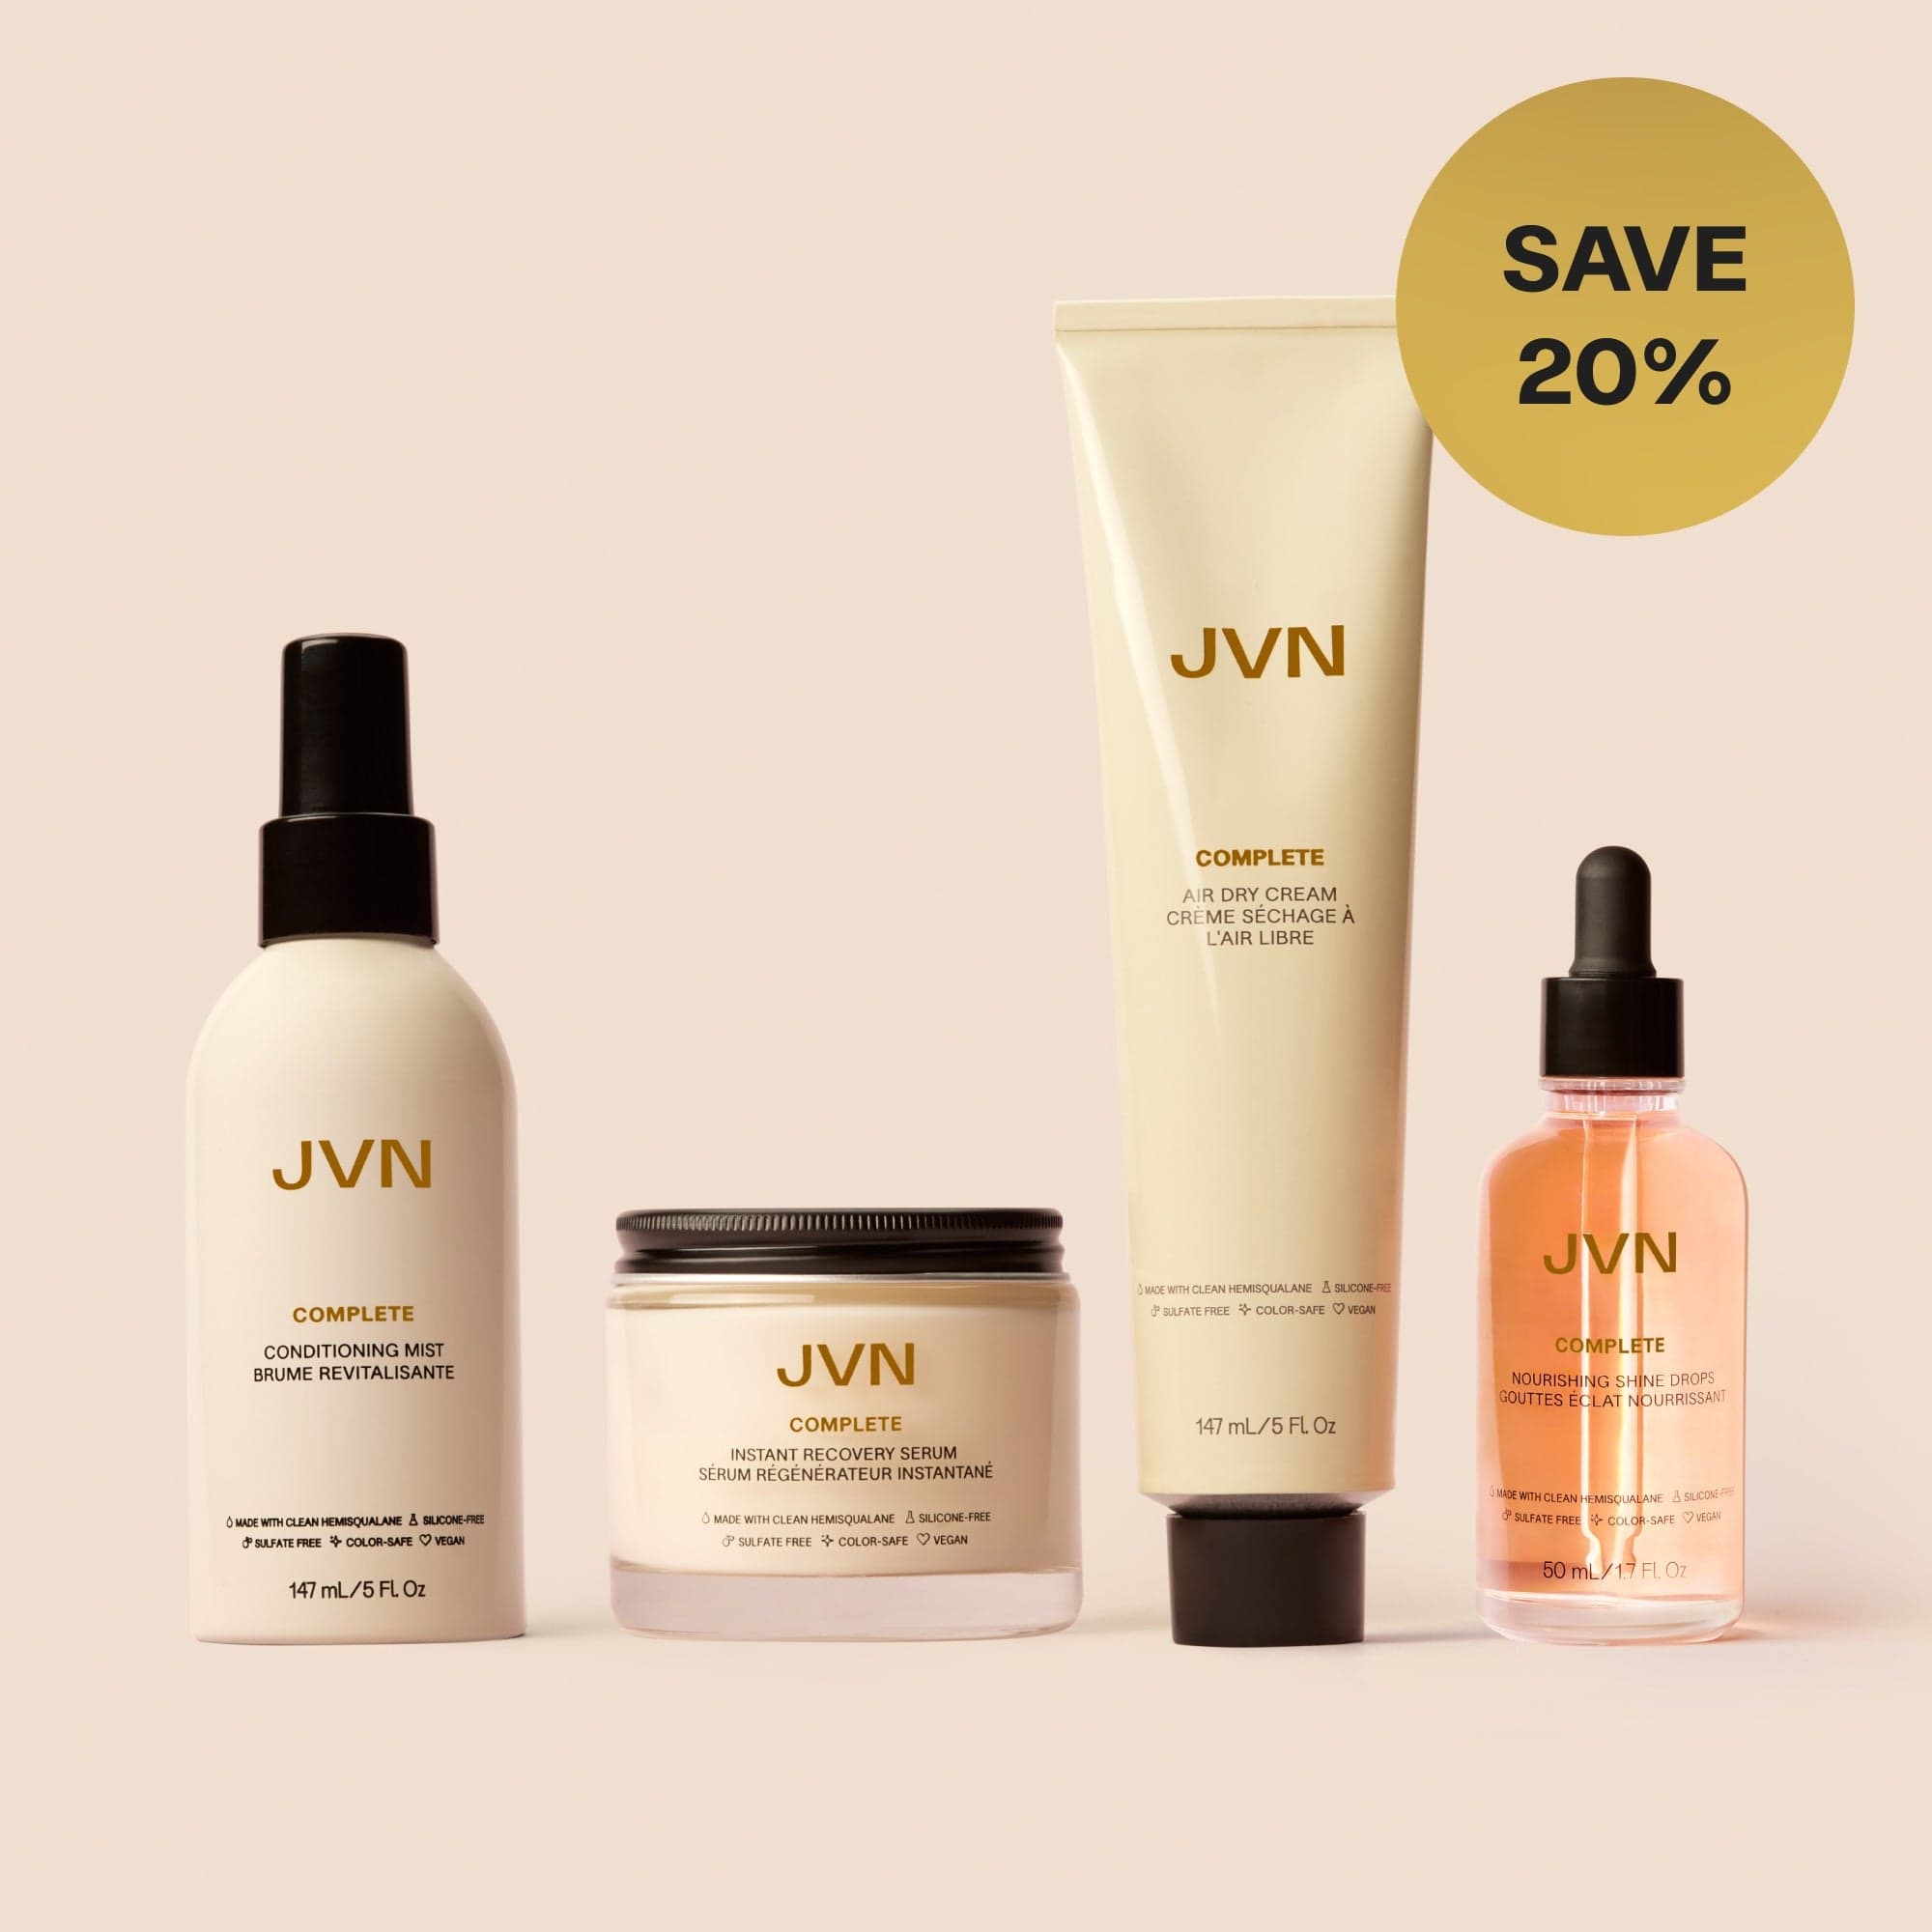 JVN Hair Keep Frizz Out Of Mom's Biz Set sulfate-free silicone-free sustainable